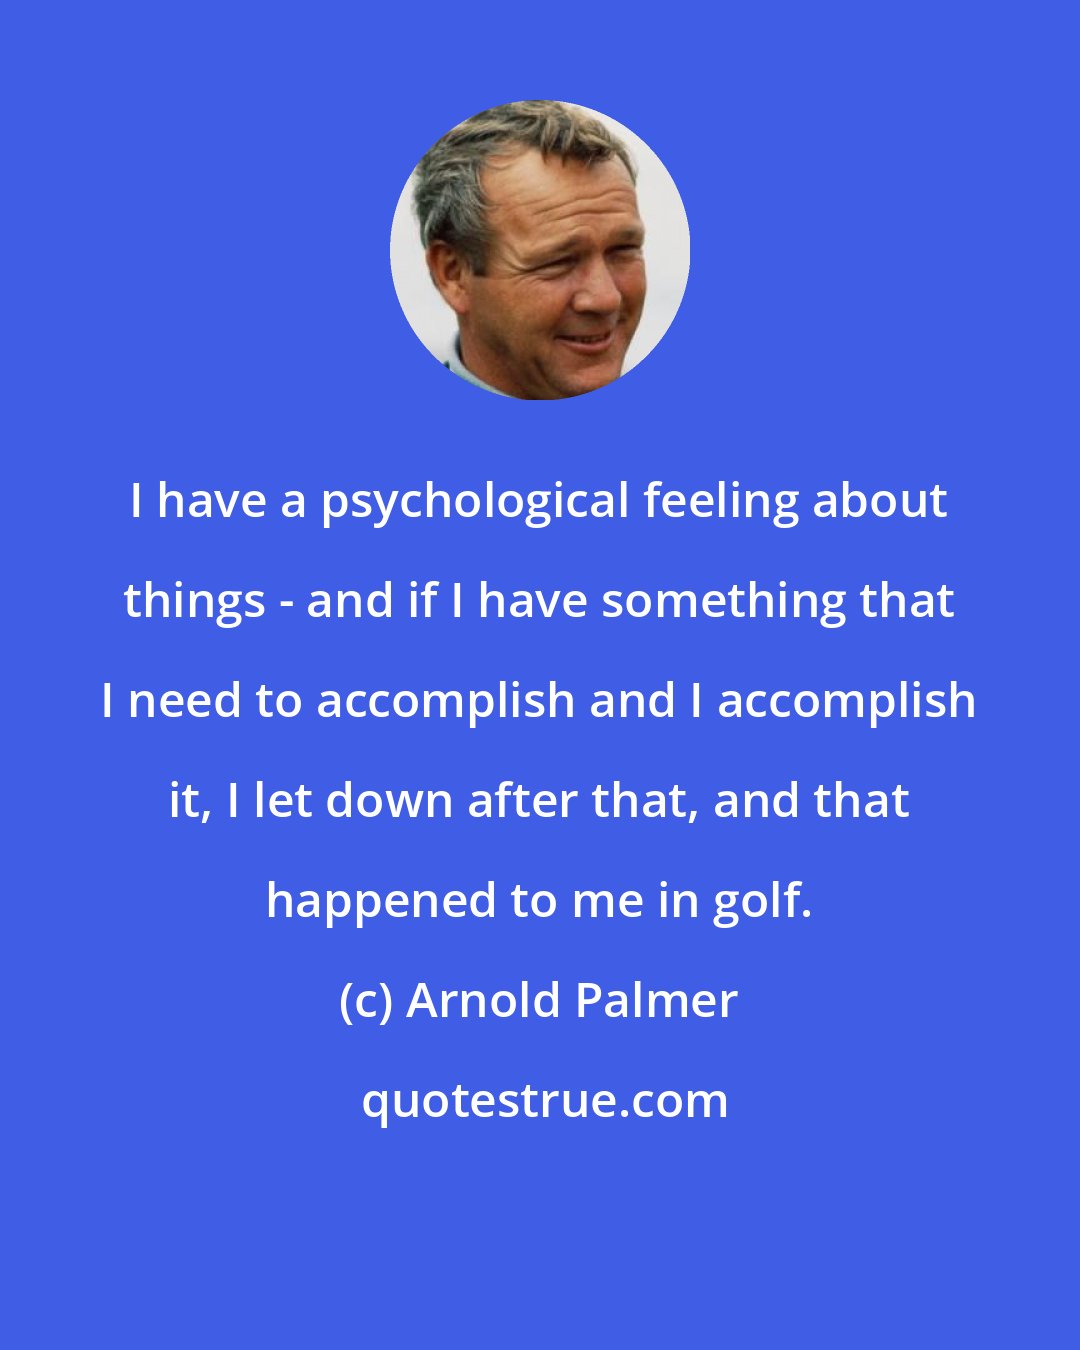 Arnold Palmer: I have a psychological feeling about things - and if I have something that I need to accomplish and I accomplish it, I let down after that, and that happened to me in golf.